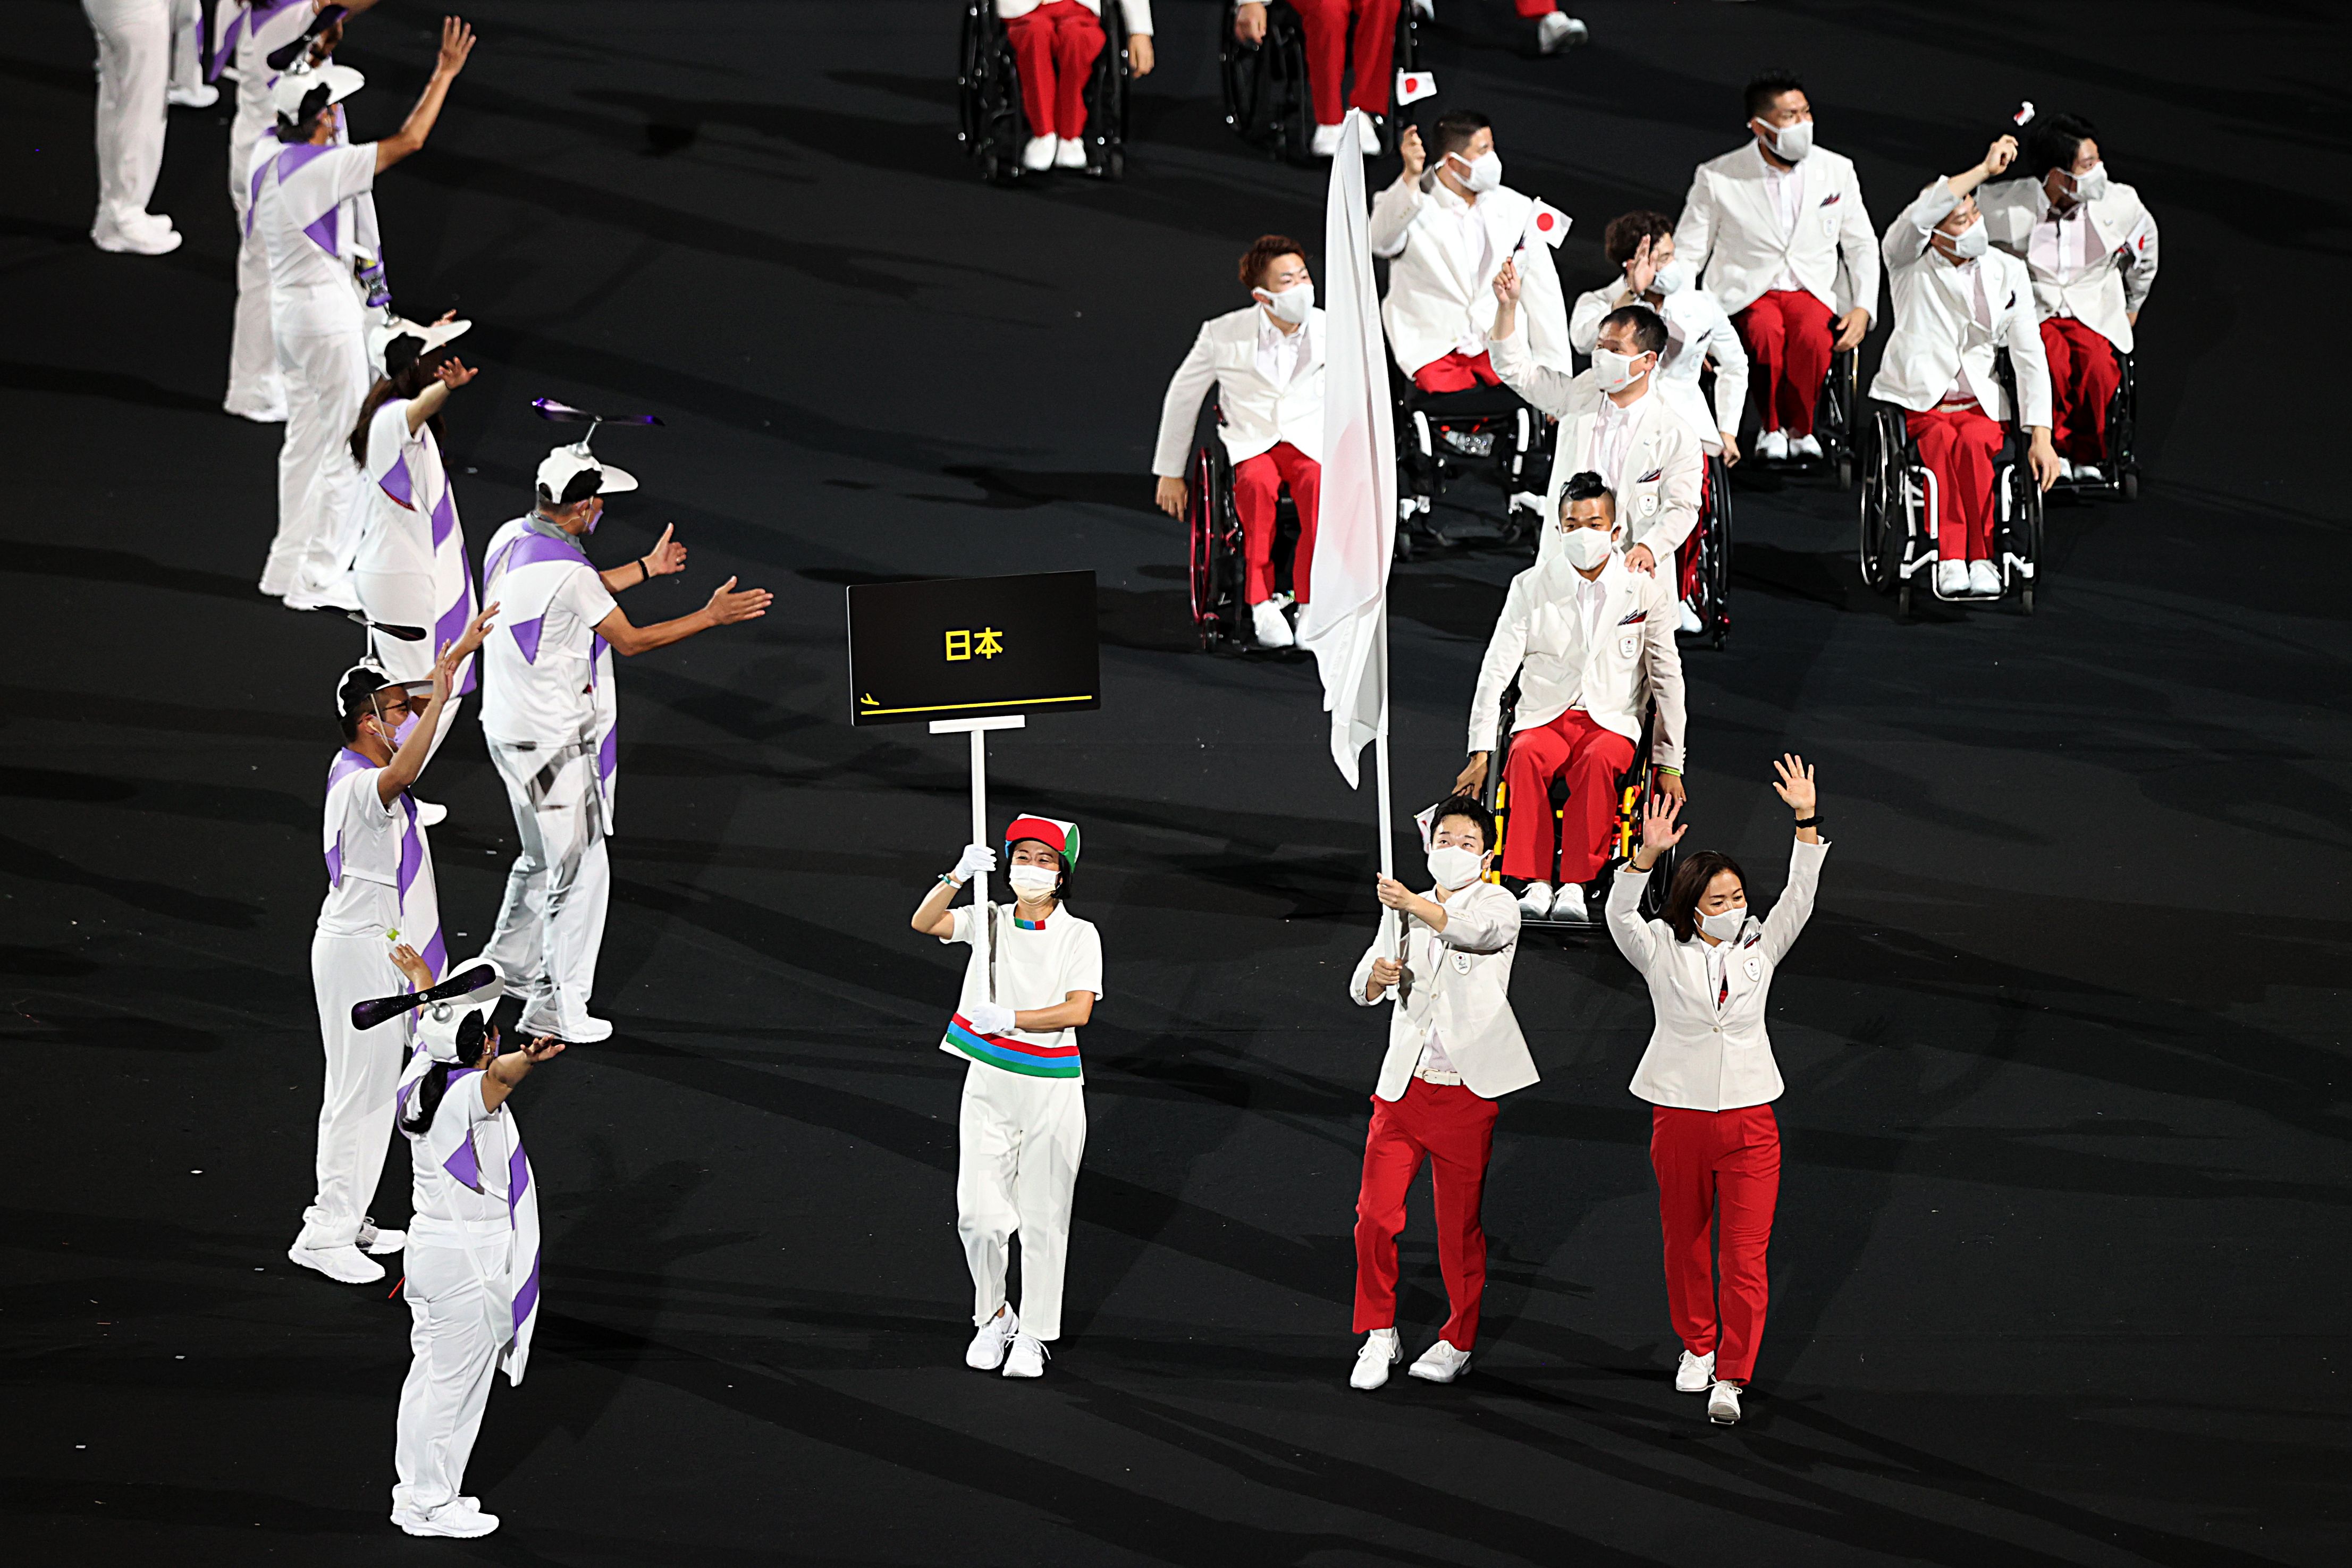 Flag bearers Mami Tani and Koyo Iwabuchi of Team Japan lead their delegation in the parade of athletes. Photo: Naomi Baker/Getty Images